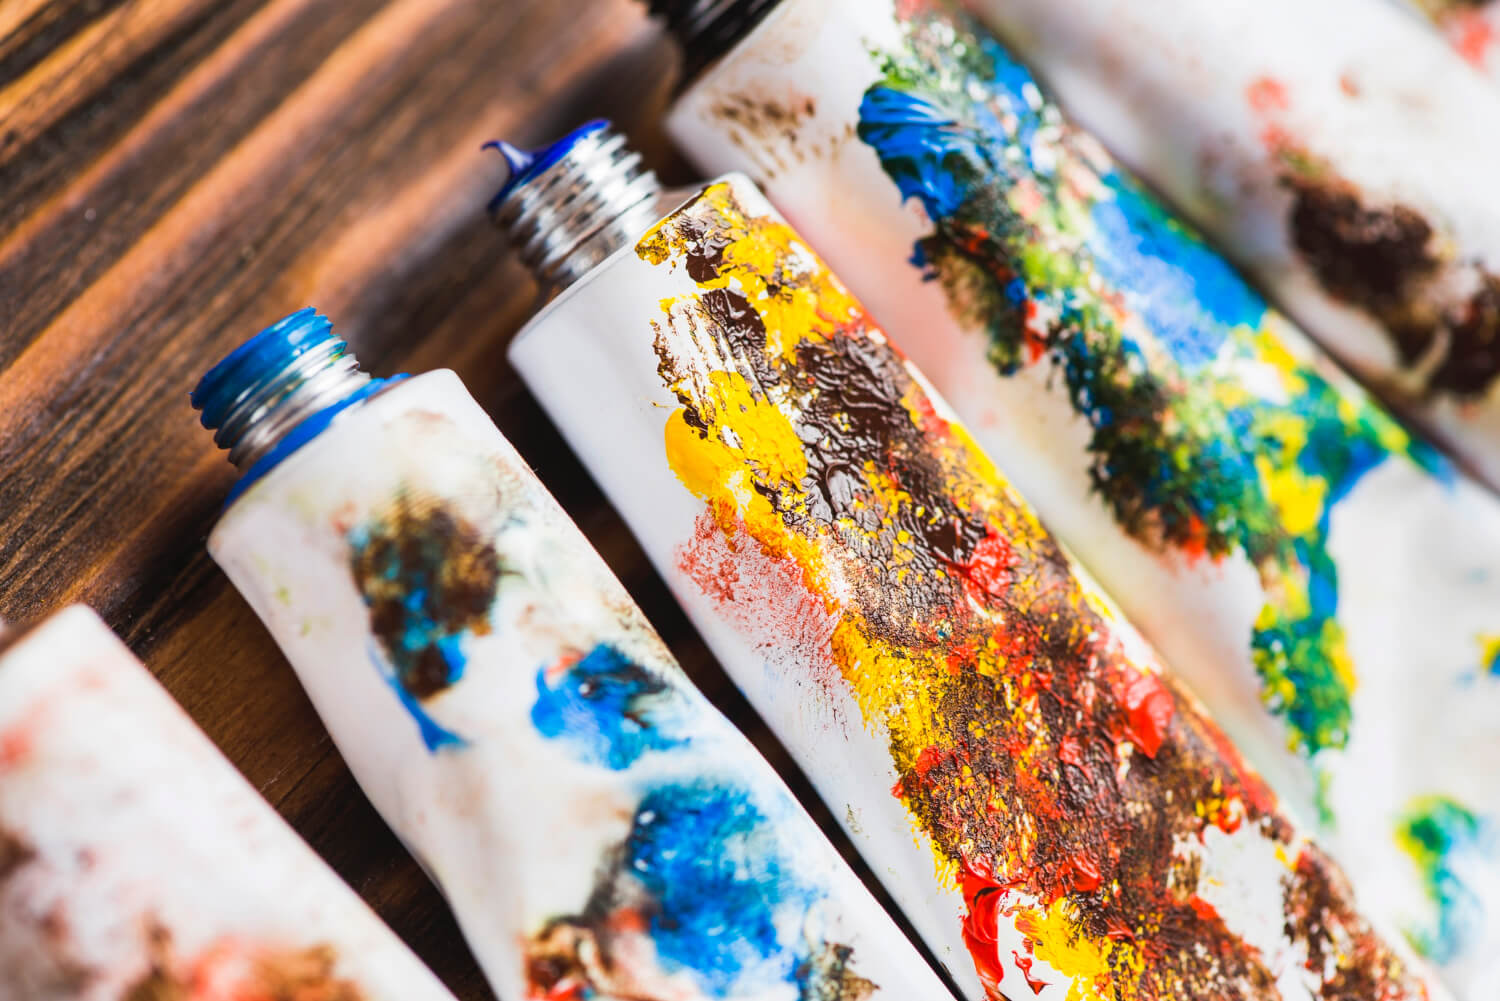 Transform your acrylic paints into fabric paints with Fabric Medium -  Sunlit Spaces